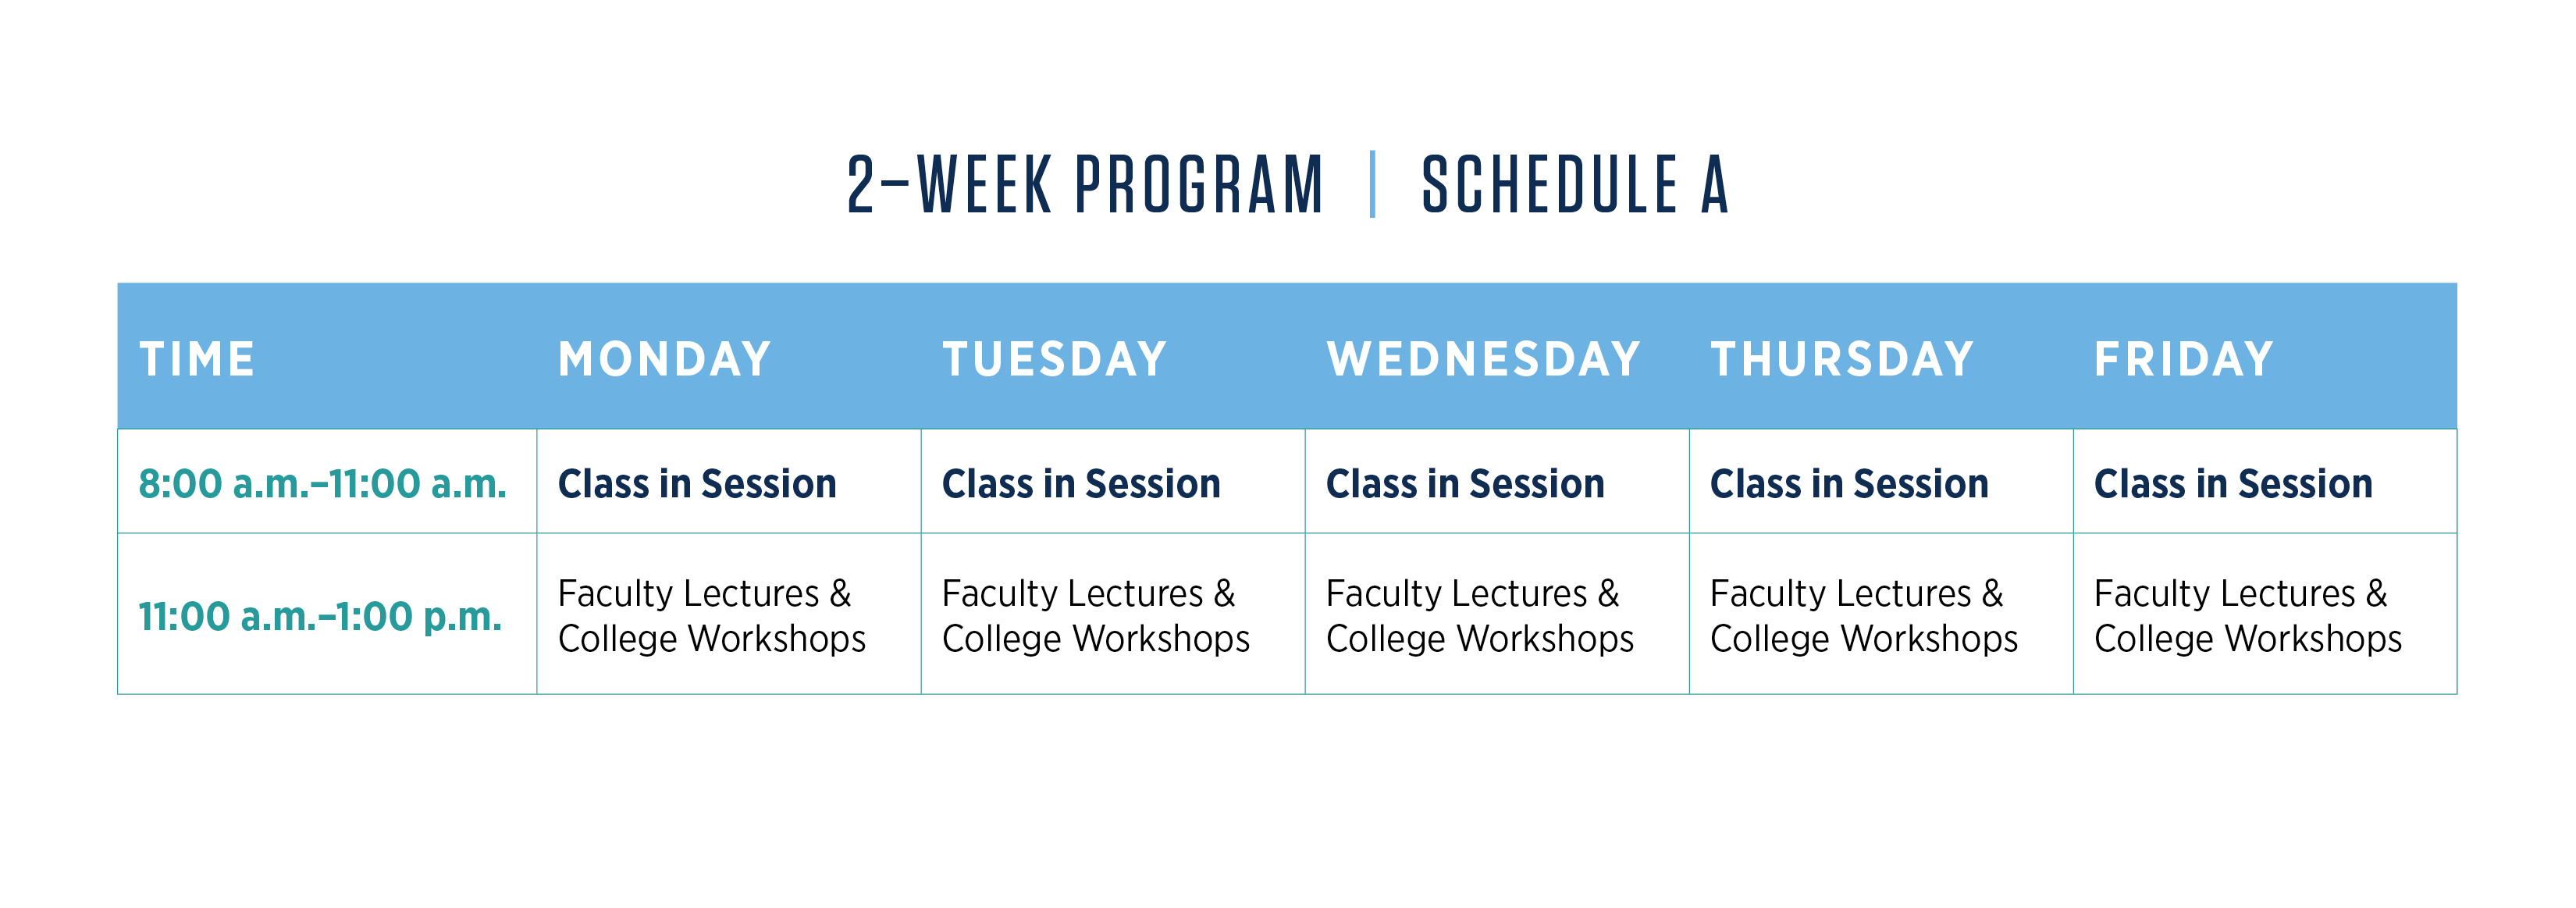 Enlargeable graphic showing 2-Week Schedule A